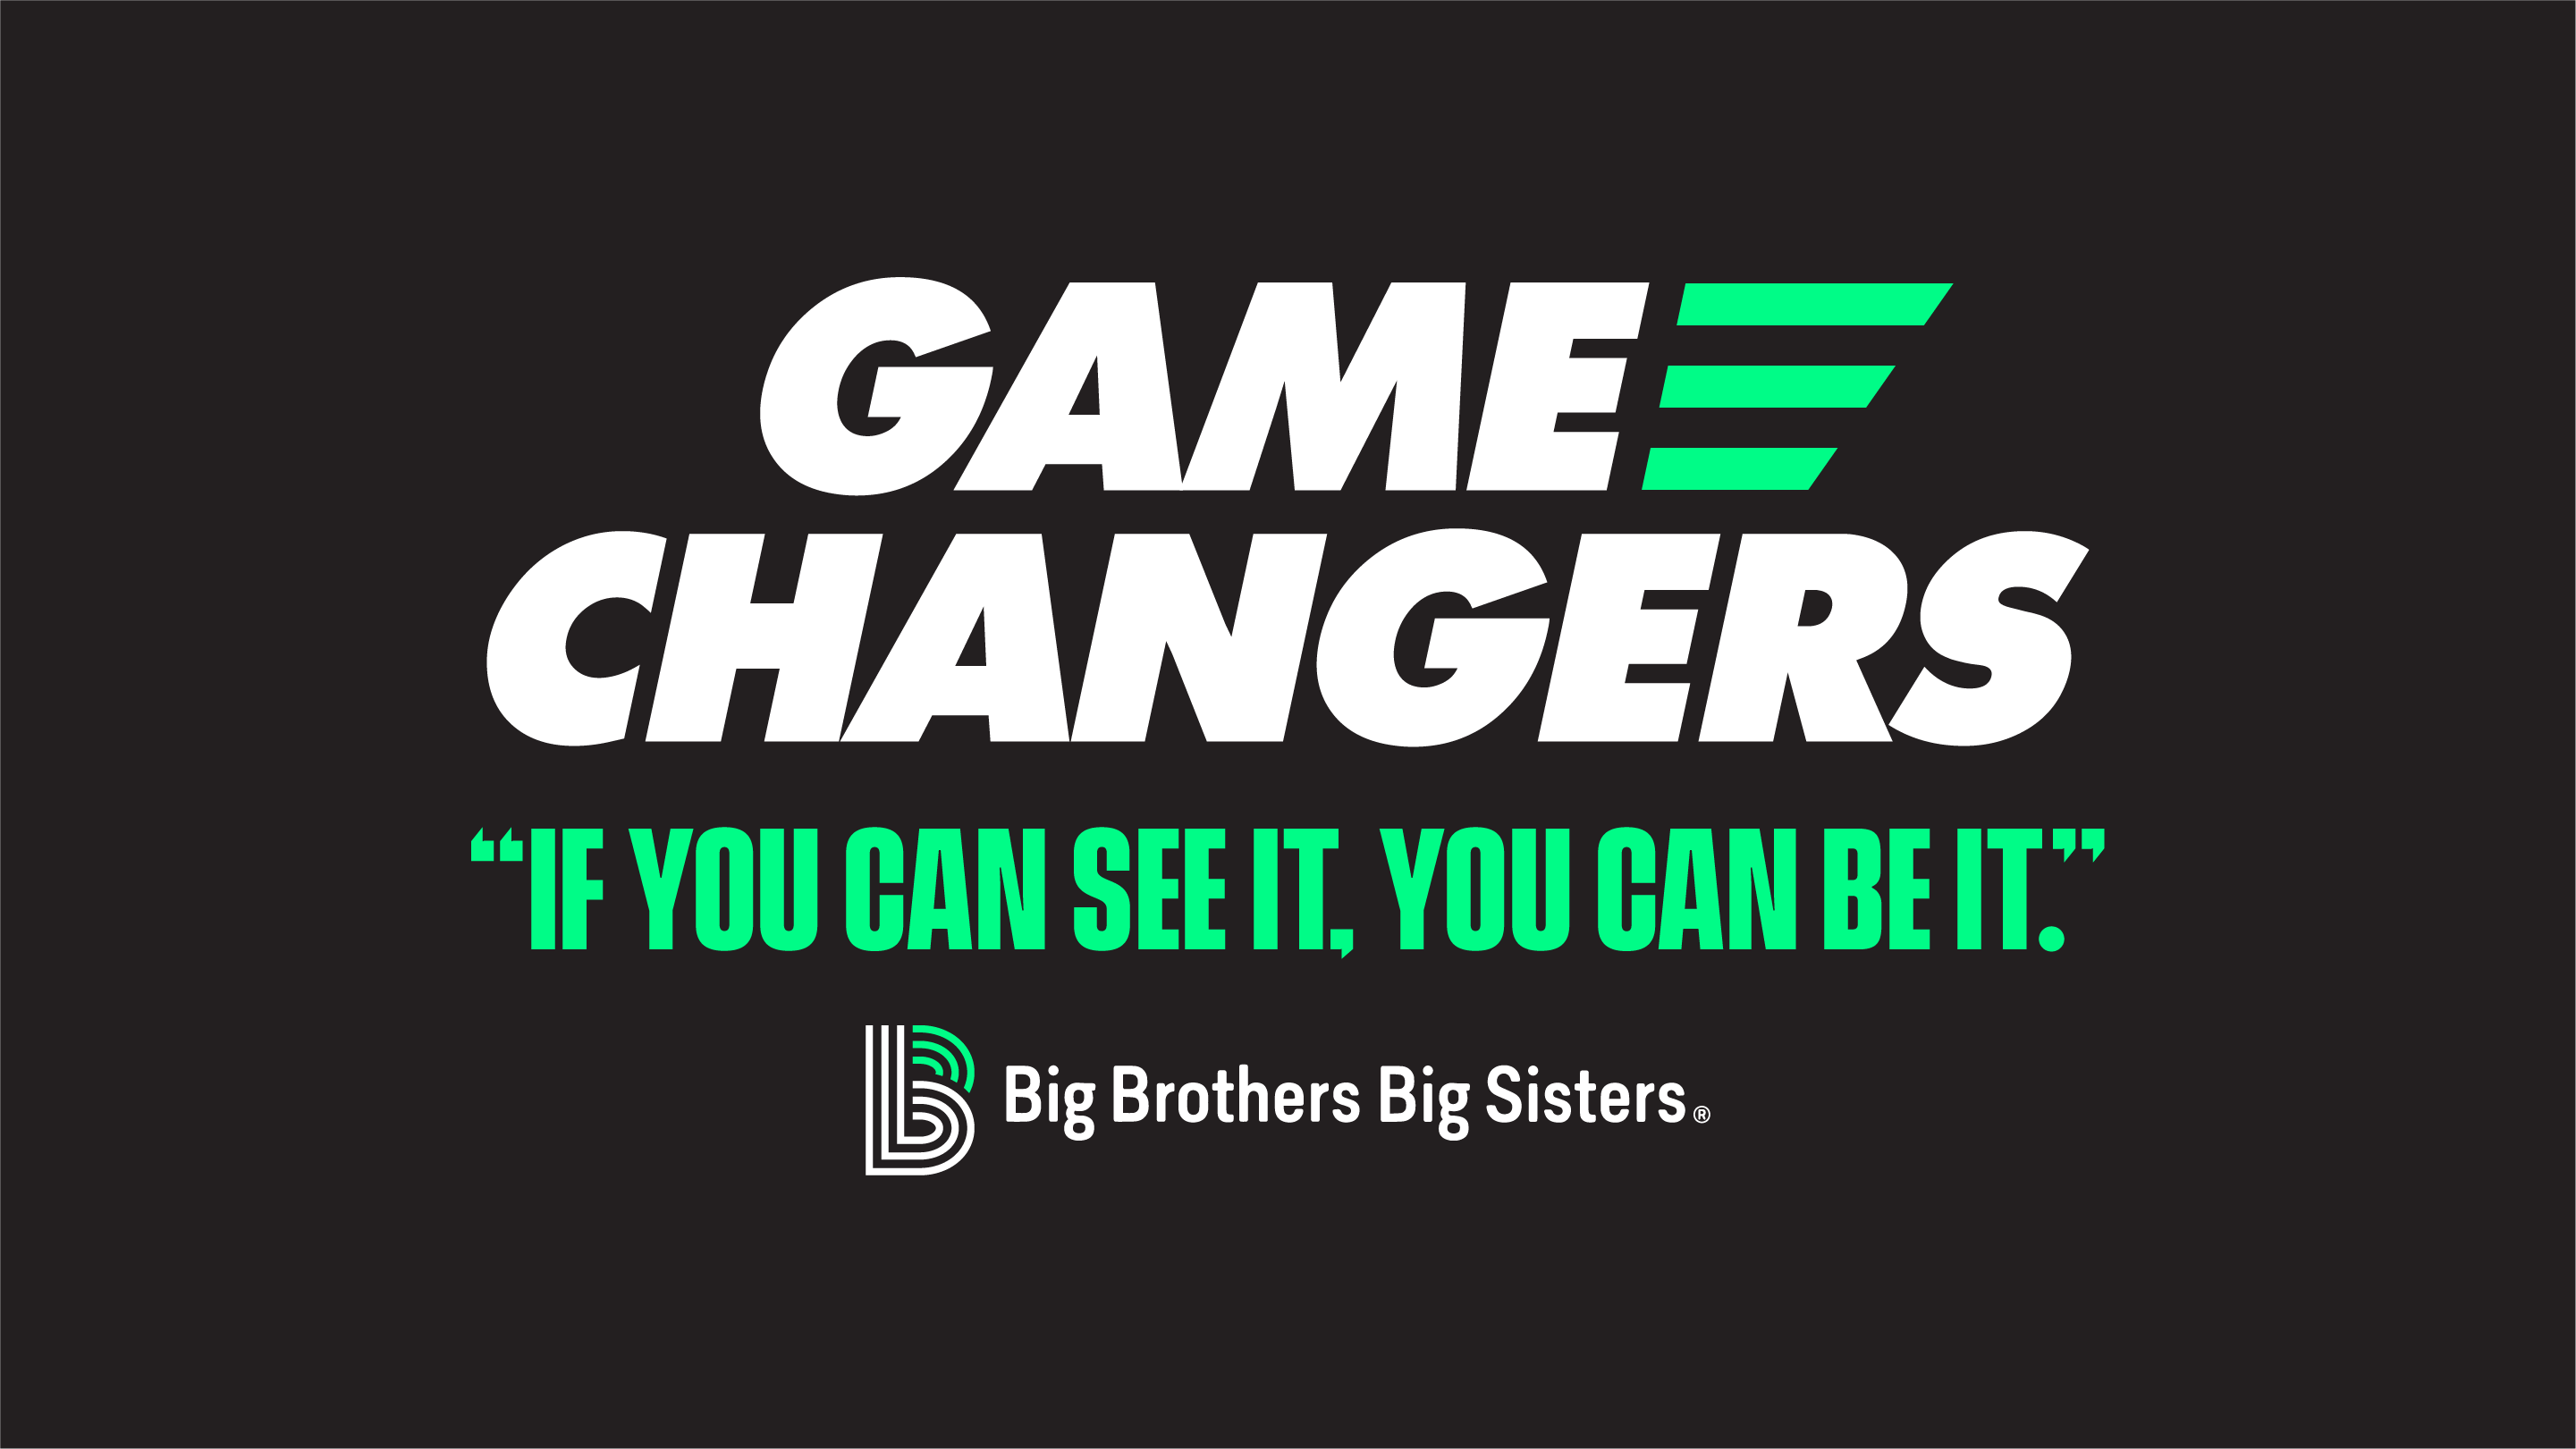 Big Brothers Big Sisters of America Announces 'Game Changers